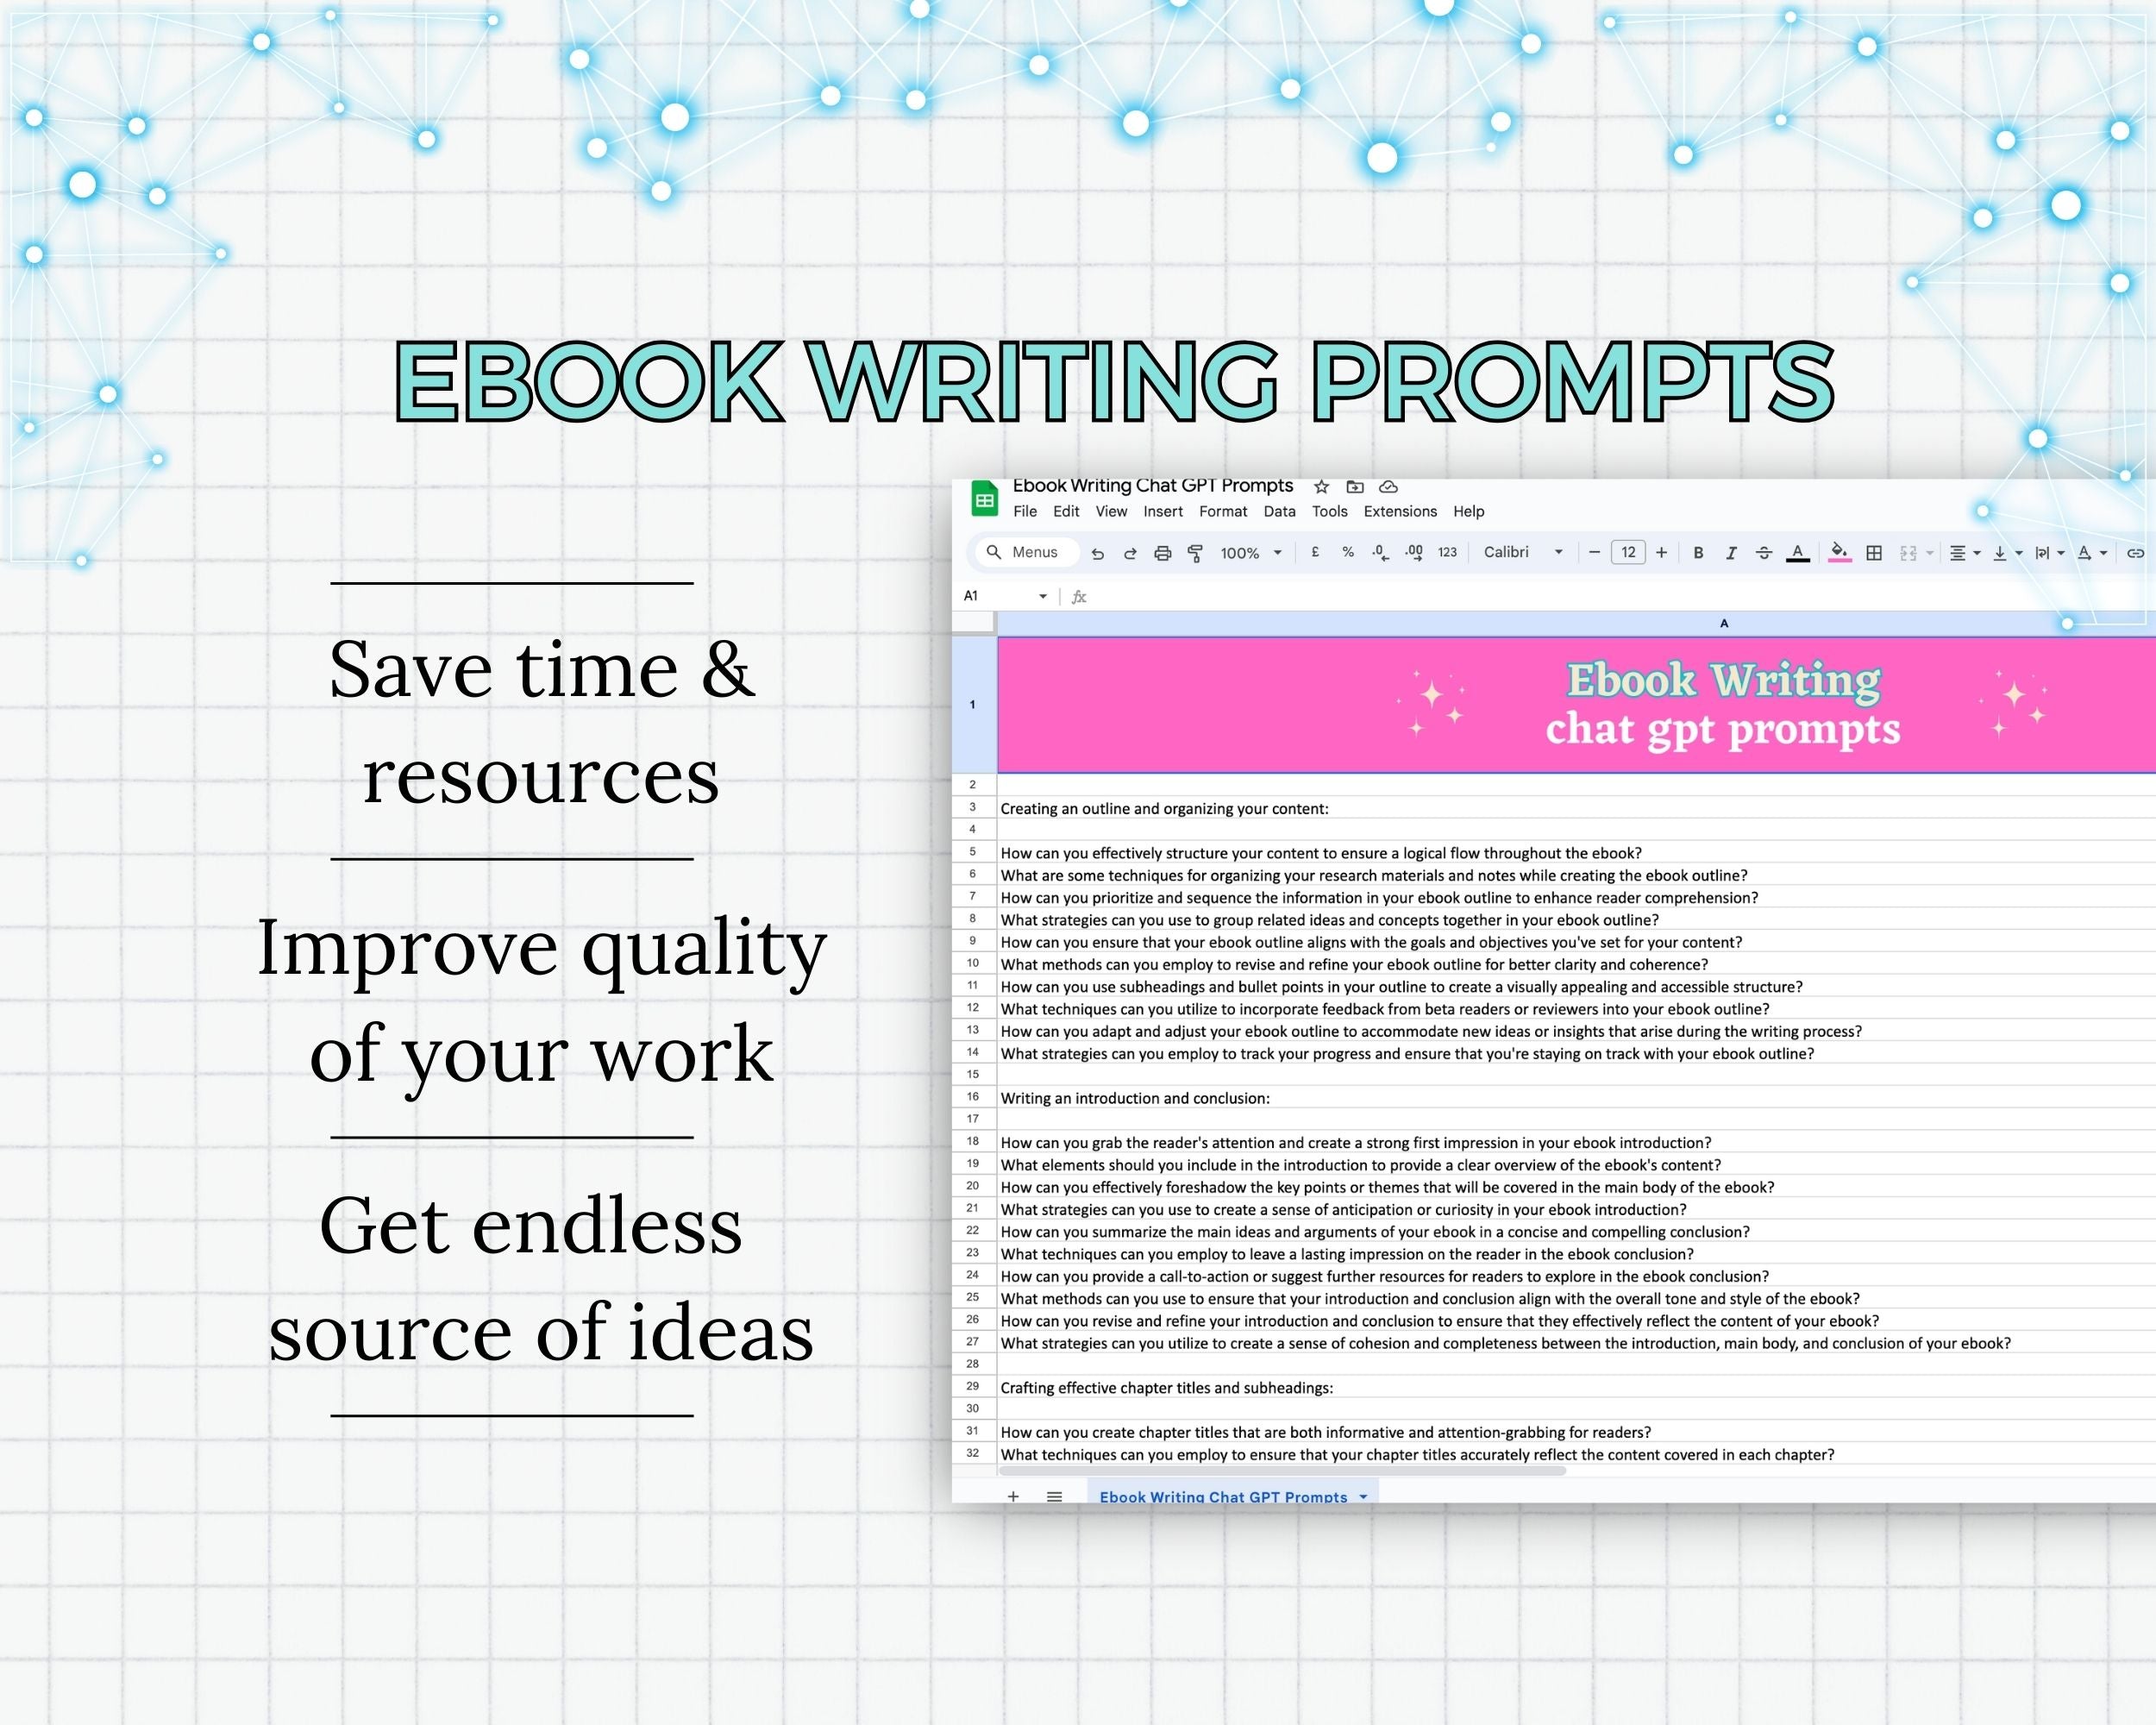 Ebook Writing Chat GPT Prompts